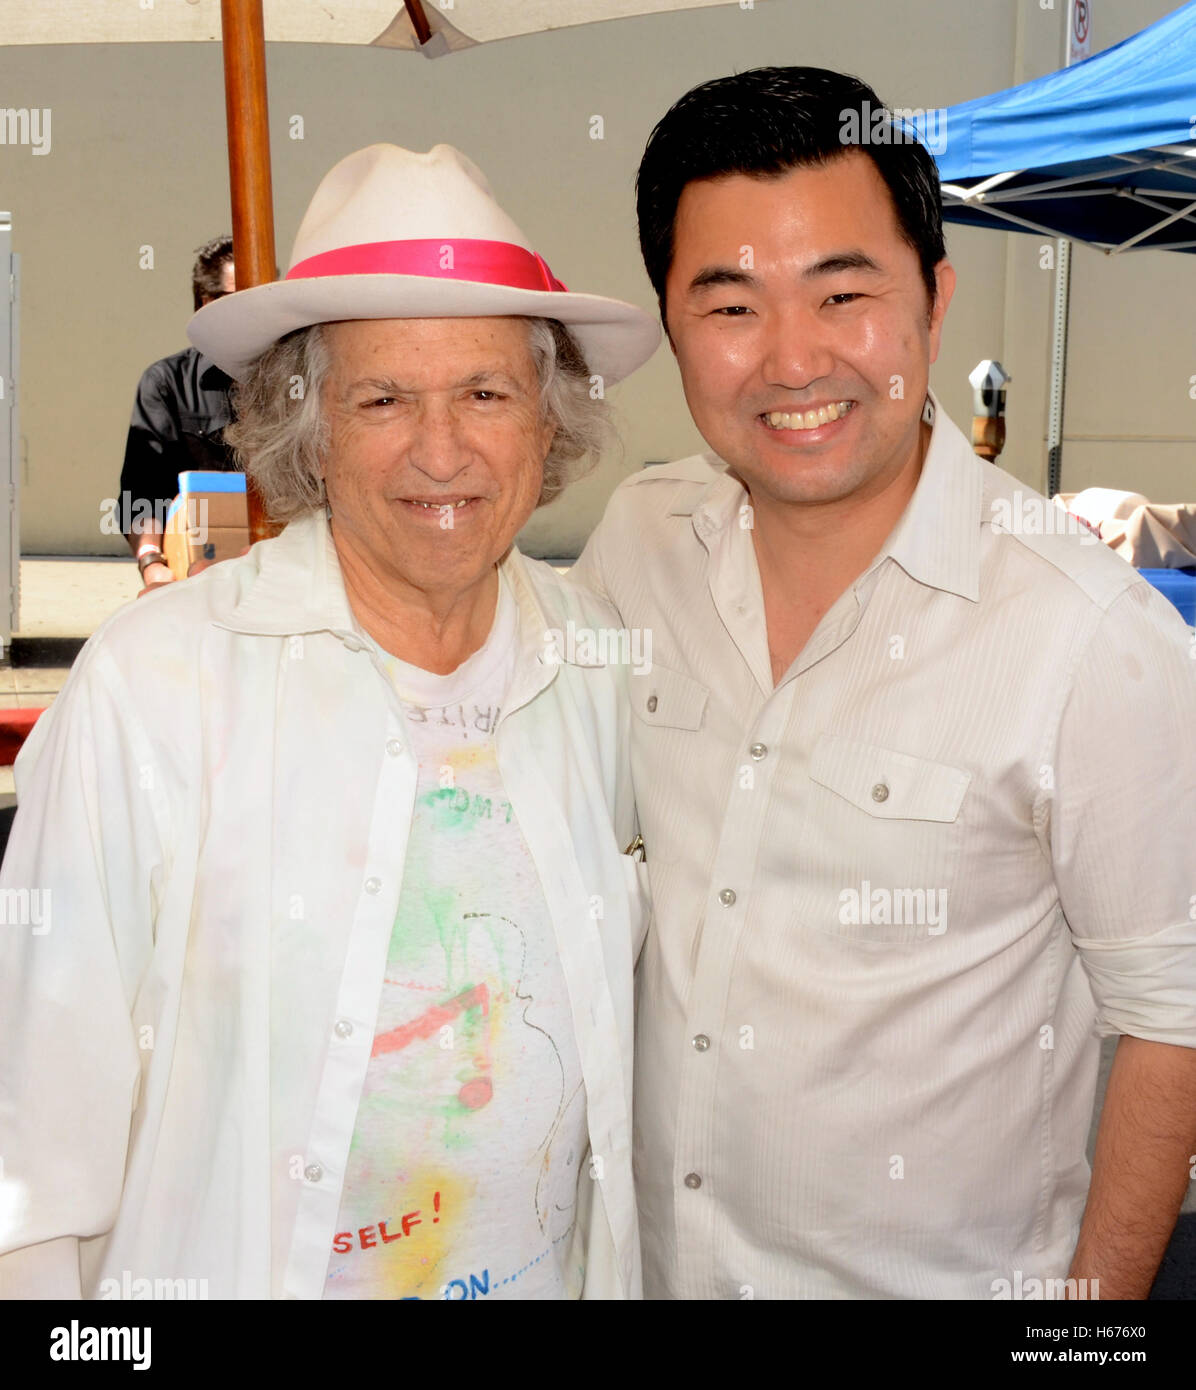 Stephen Kalinich and David Ryu attends the 25th Annual Sherman Oaks Street Fair Featuring The Stray Cats' Lee Rocker in Sherman Oaks, California on October 18, 2015 Stock Photo